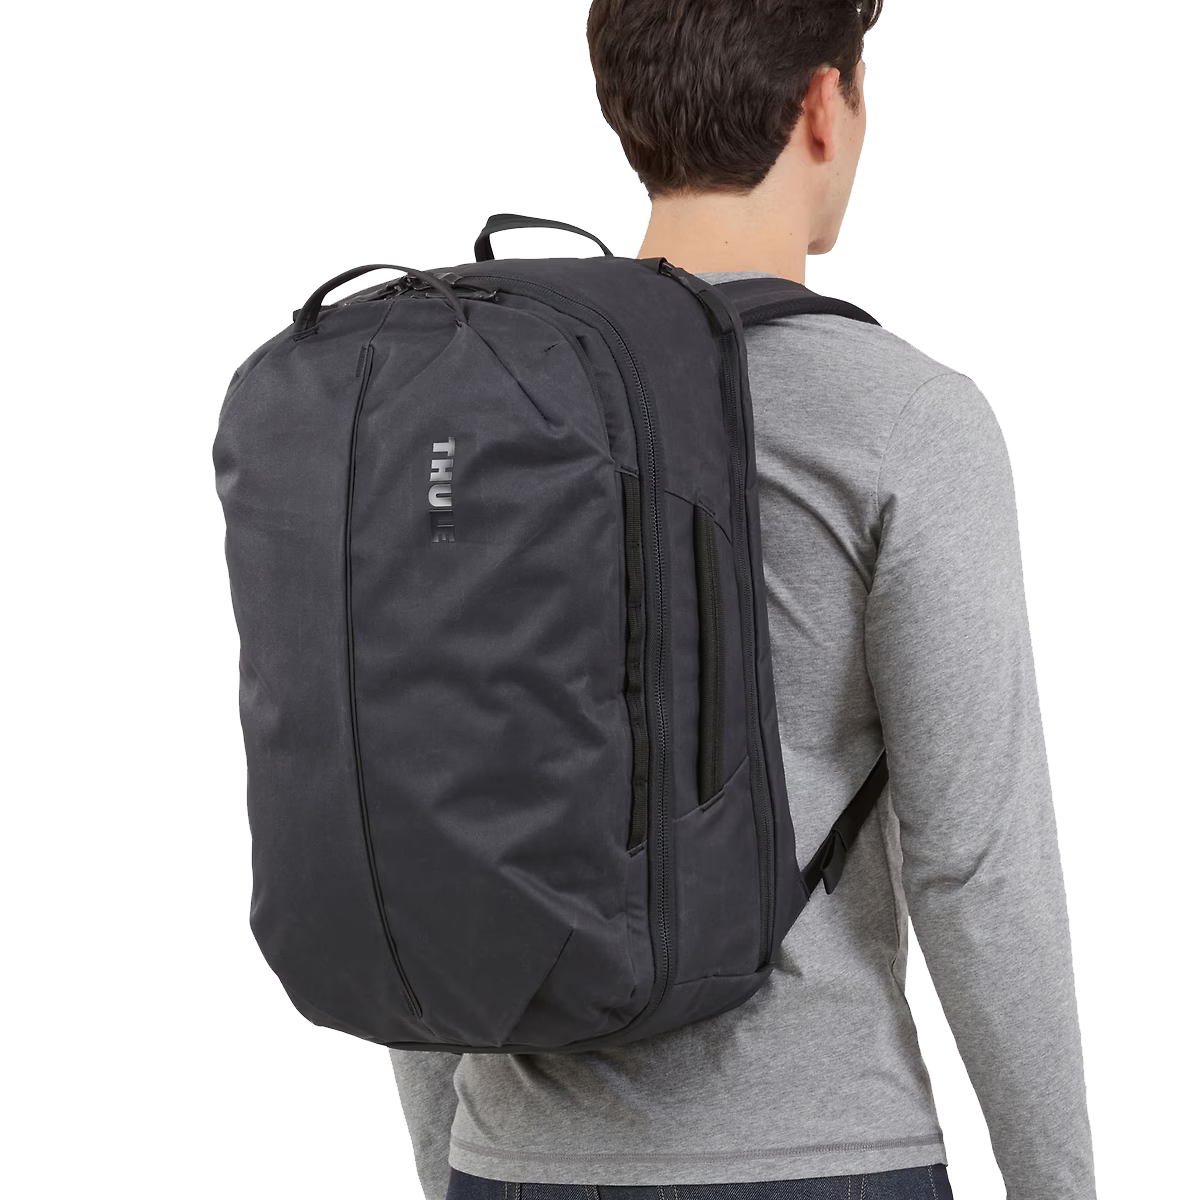 Aion Travel 40 L Backpack alternate view